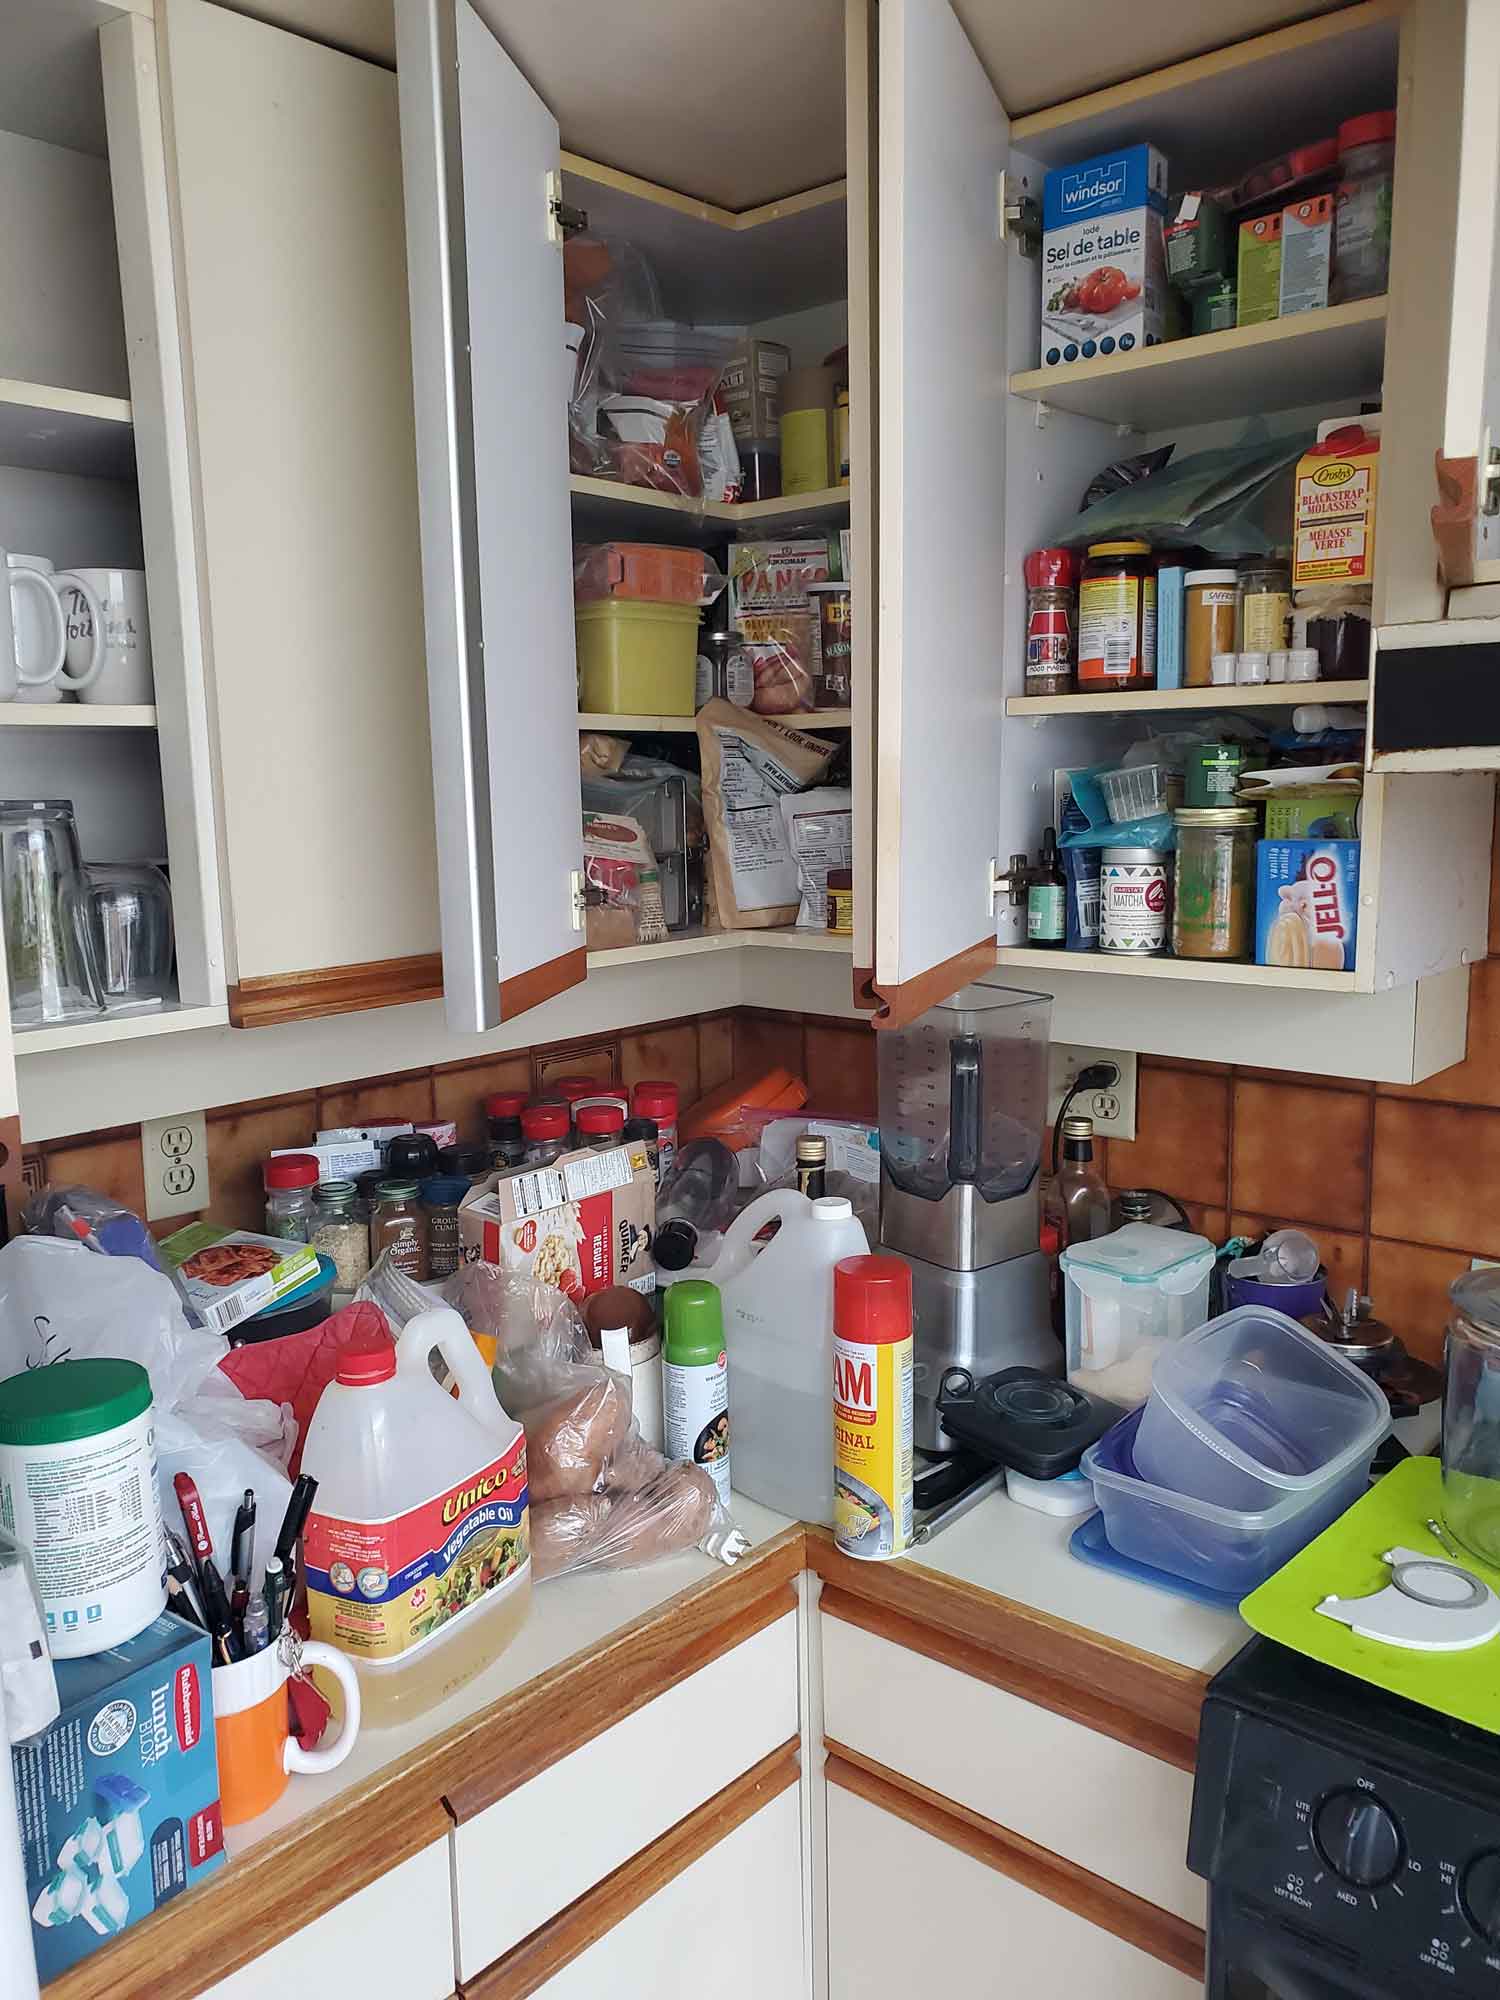 A kitchen with full shelves and a counter-top inaccessible due to items stack on it